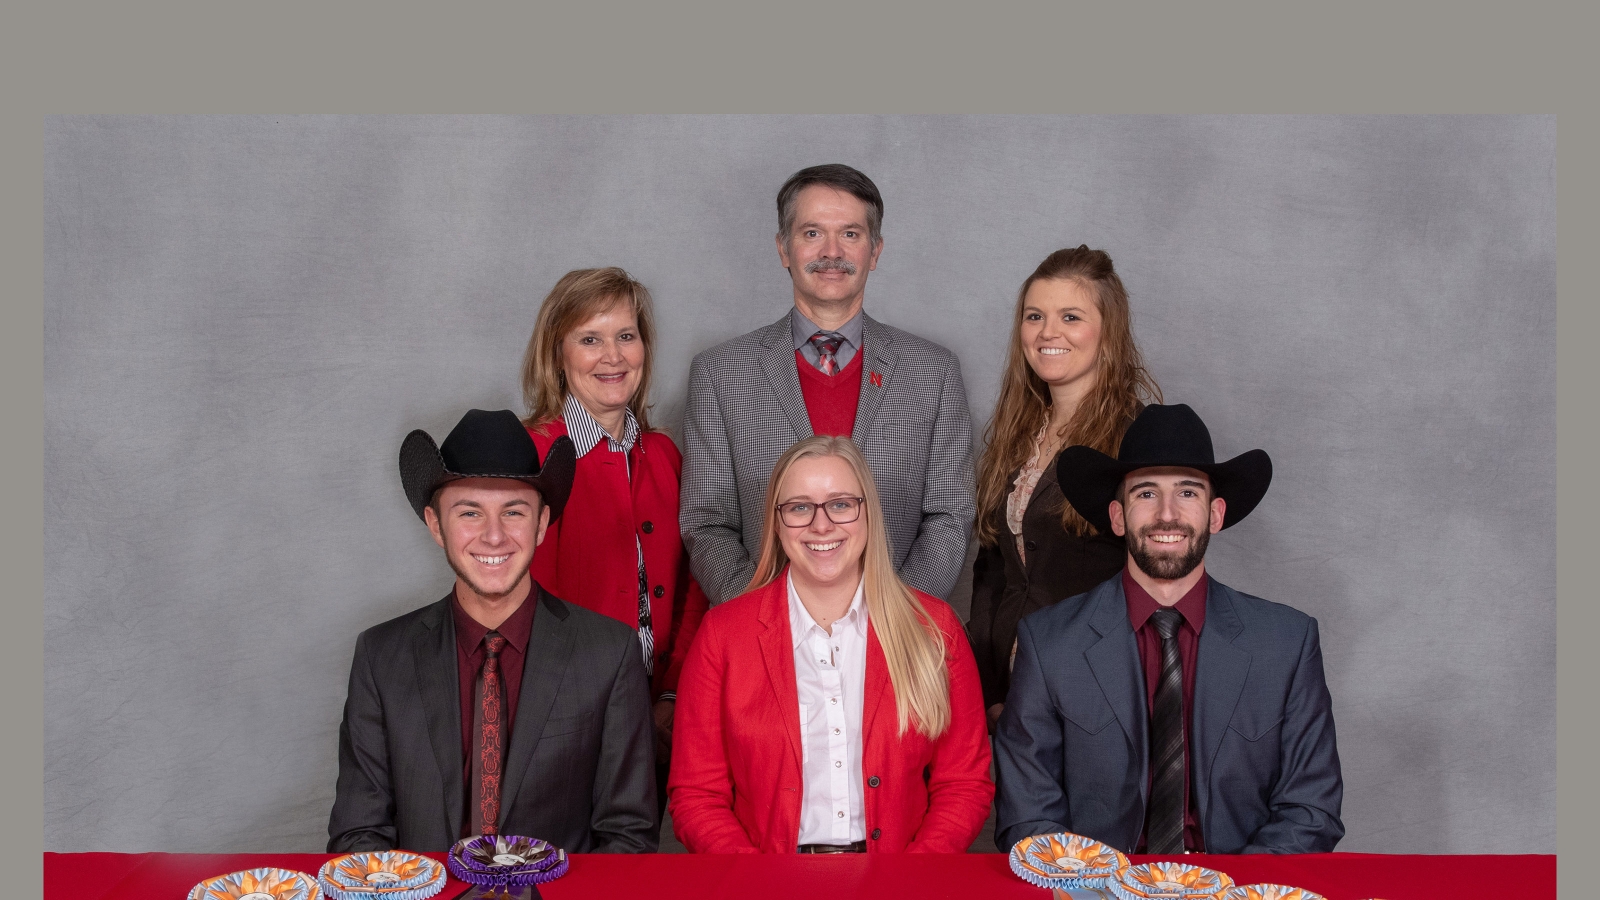 2018 horse judging group picture